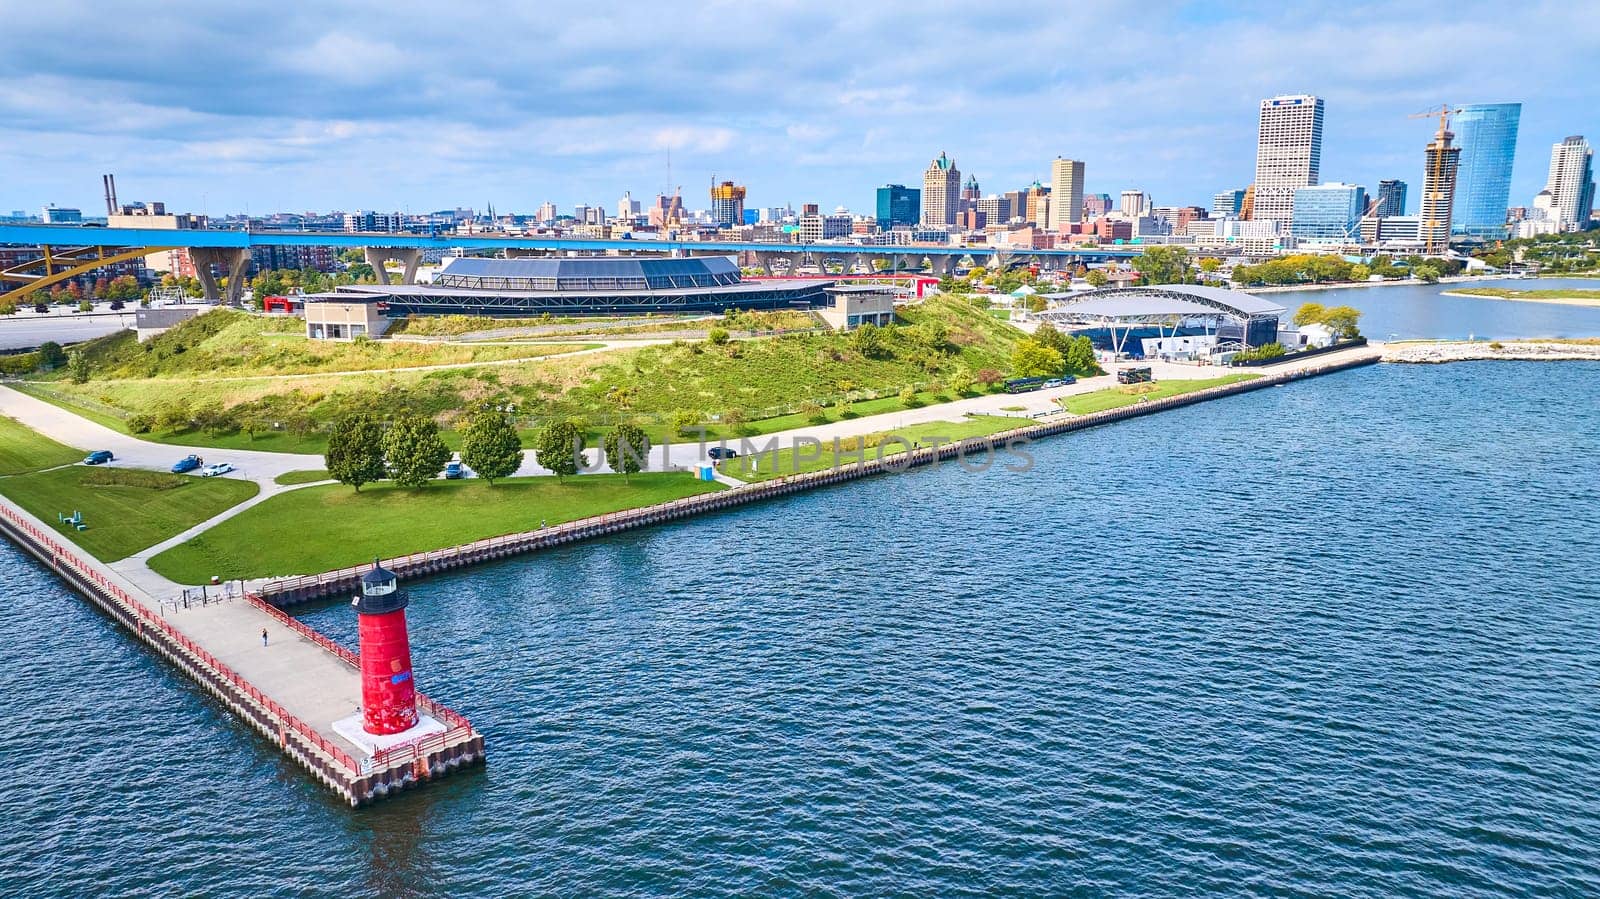 Aerial view of vibrant Milwaukee Pierhead Lighthouse guiding over Lake Michigan, with urban skyline and lush park in the backdrop